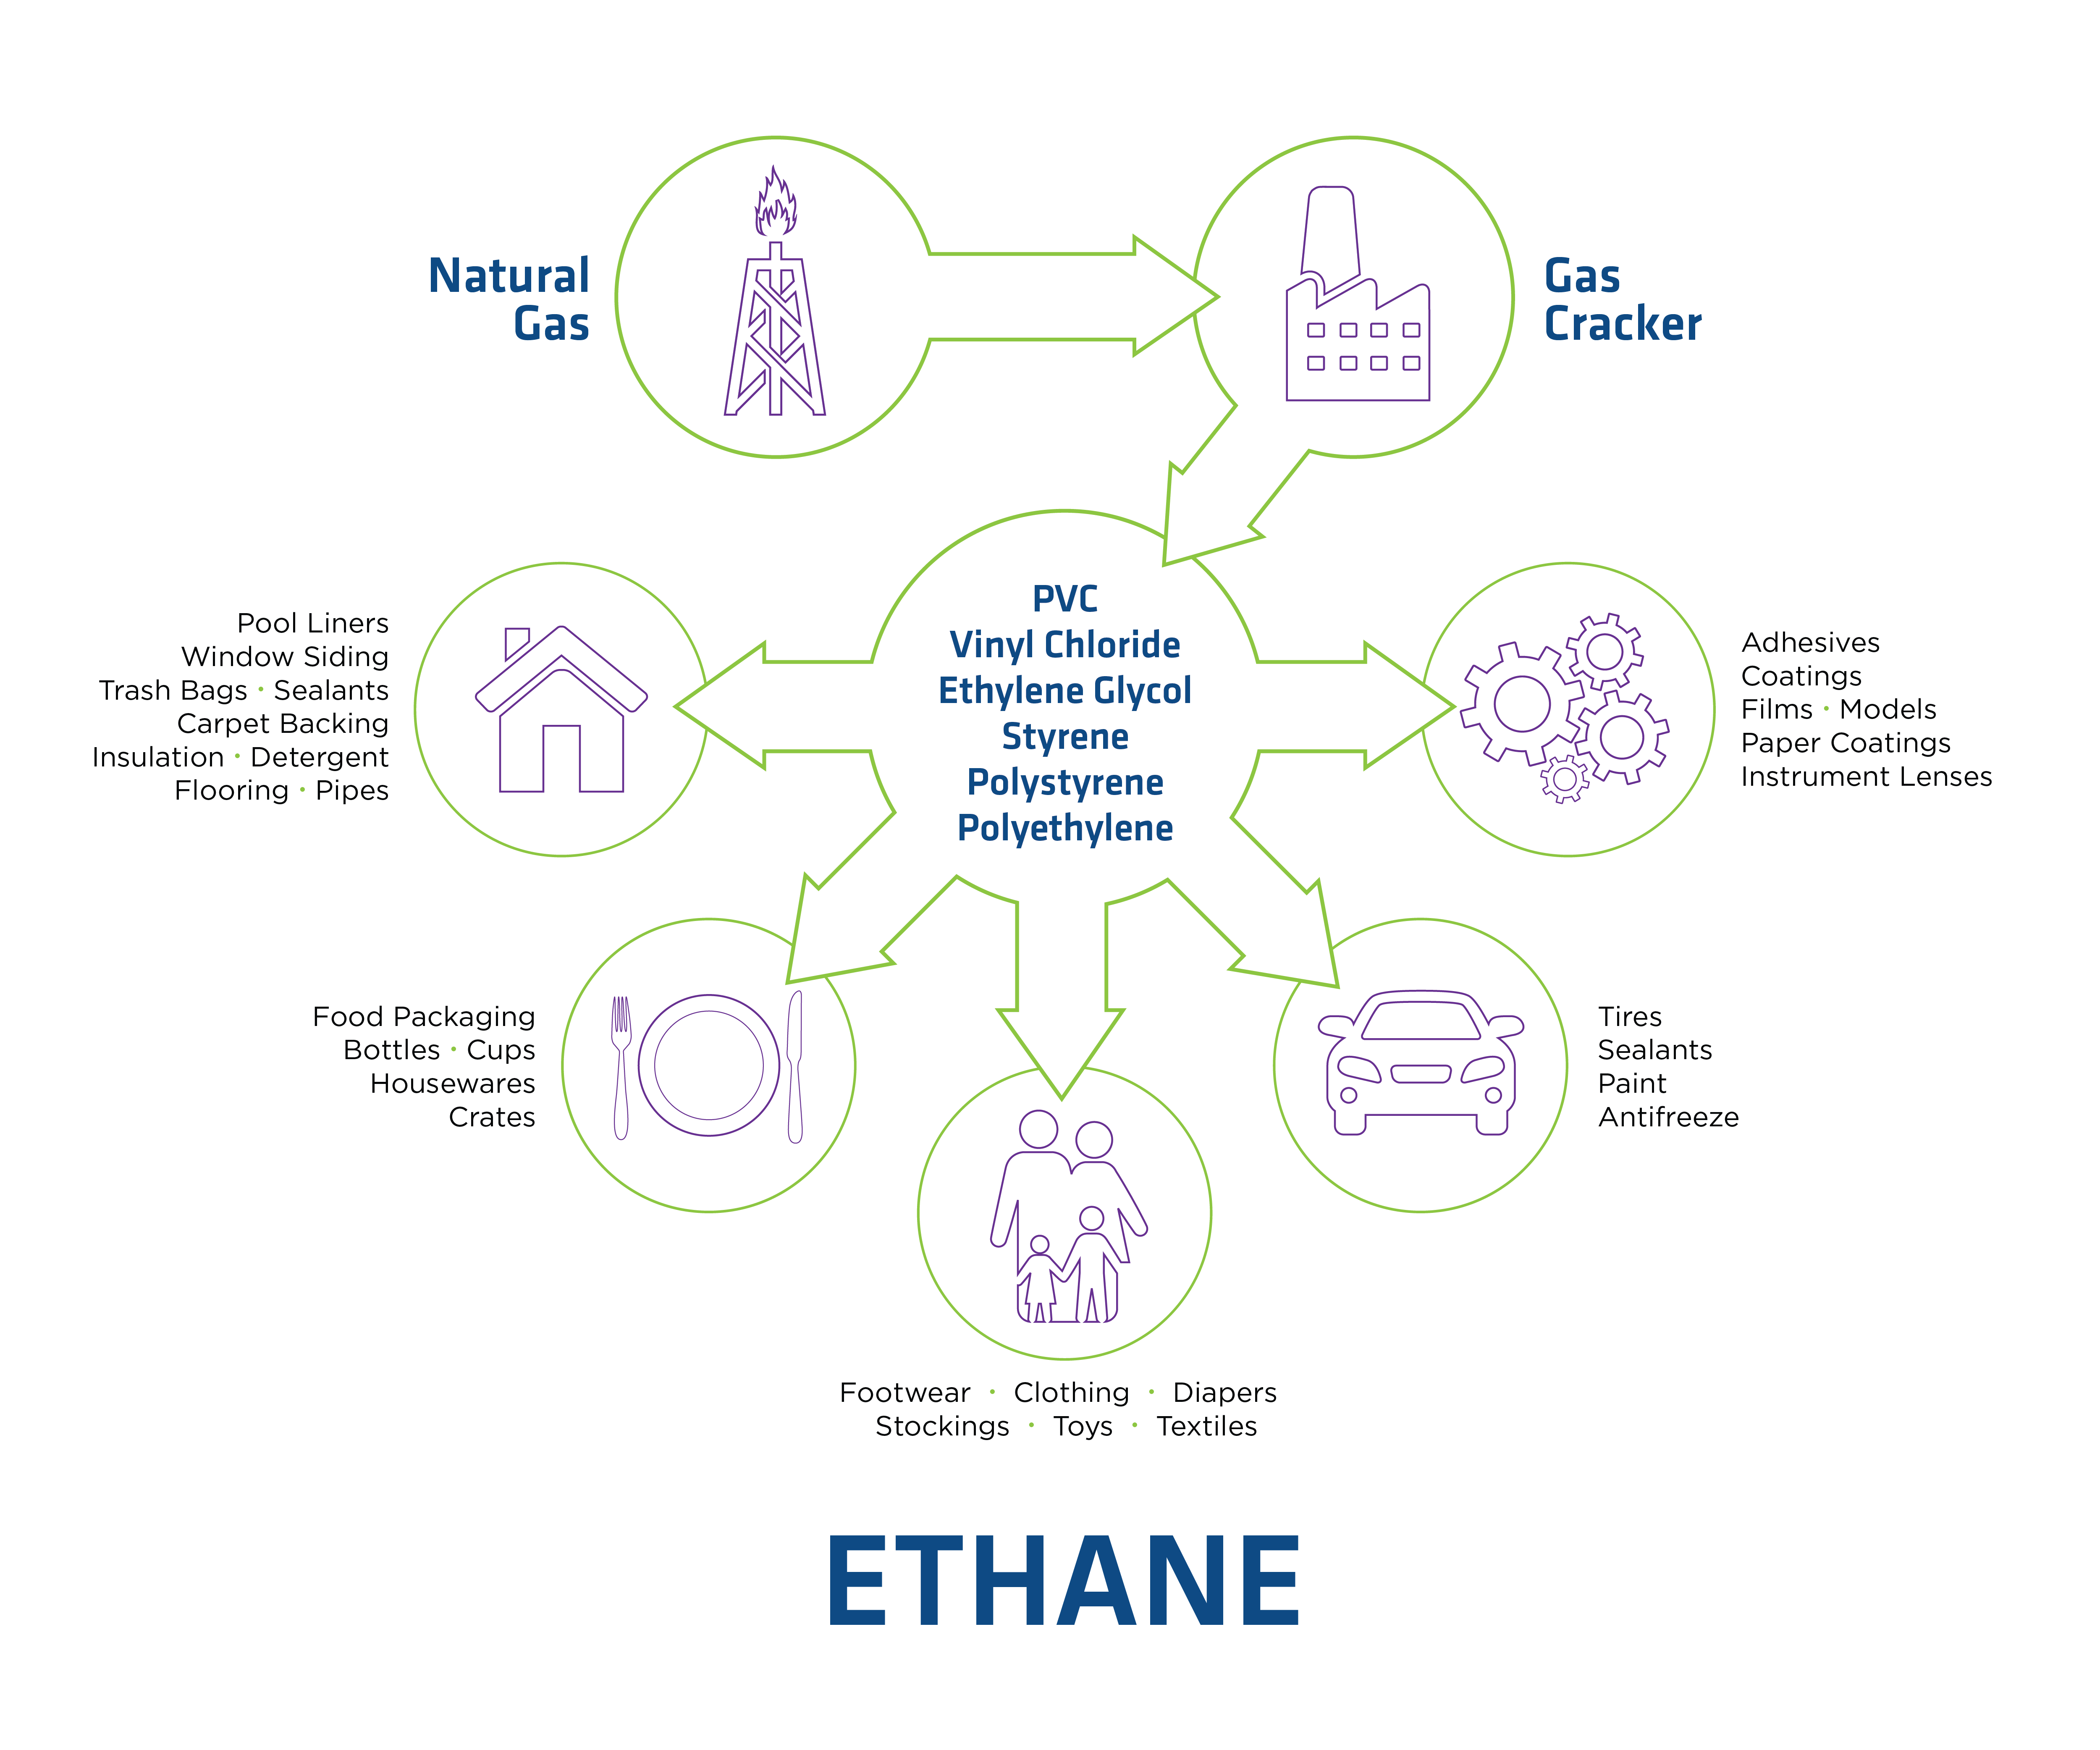 SP20 255250 NatGas Chain Ethane 1b - Overview